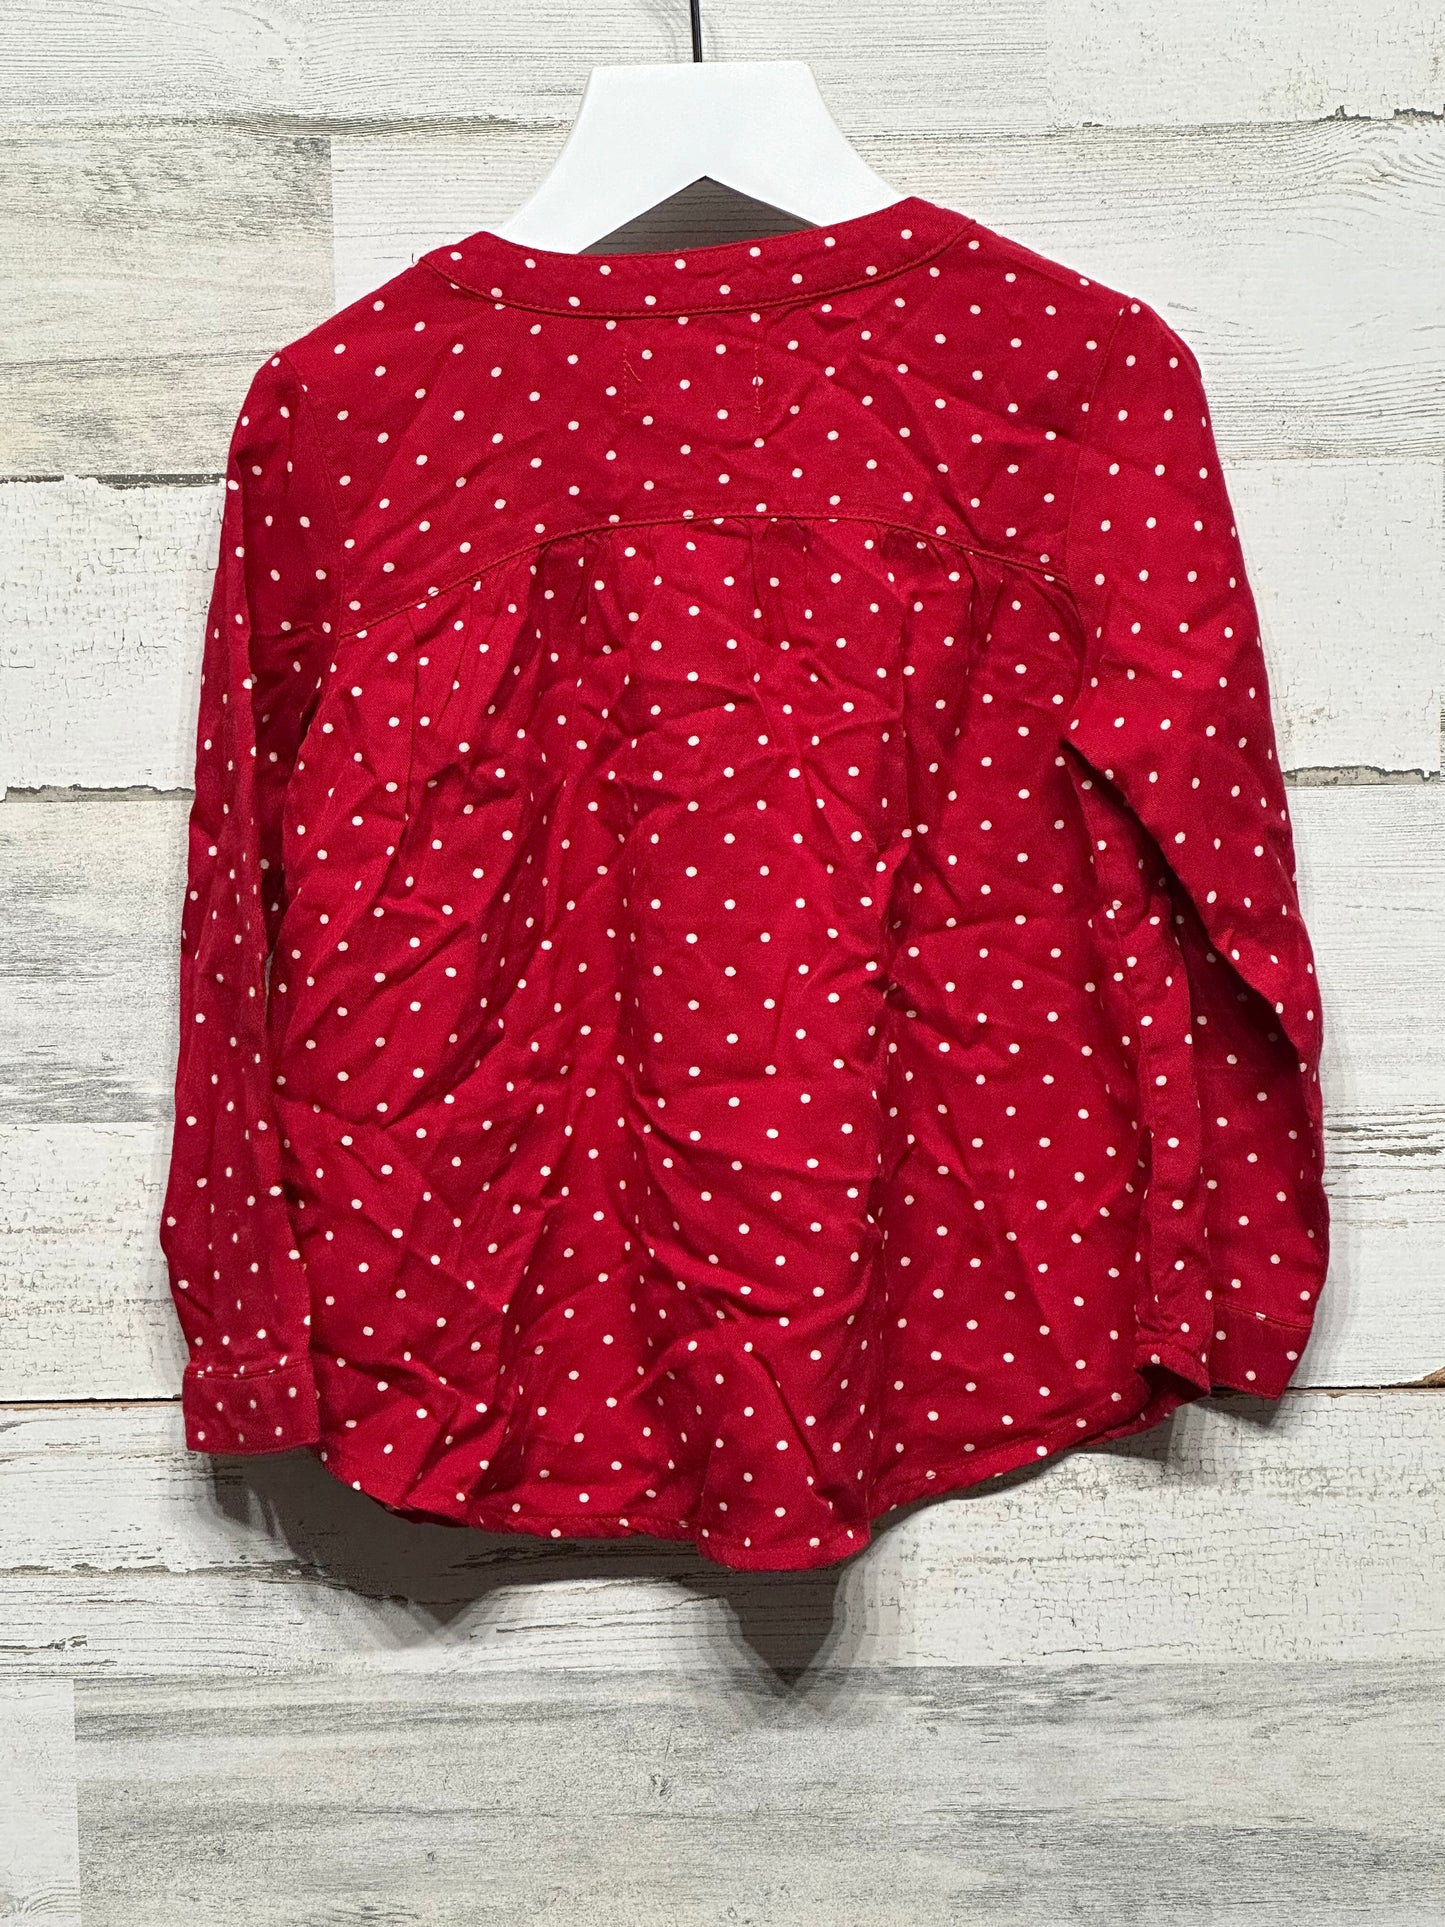 Girls Size 3t Old Navy Red Polka Dot Tunic - Good Used Condition